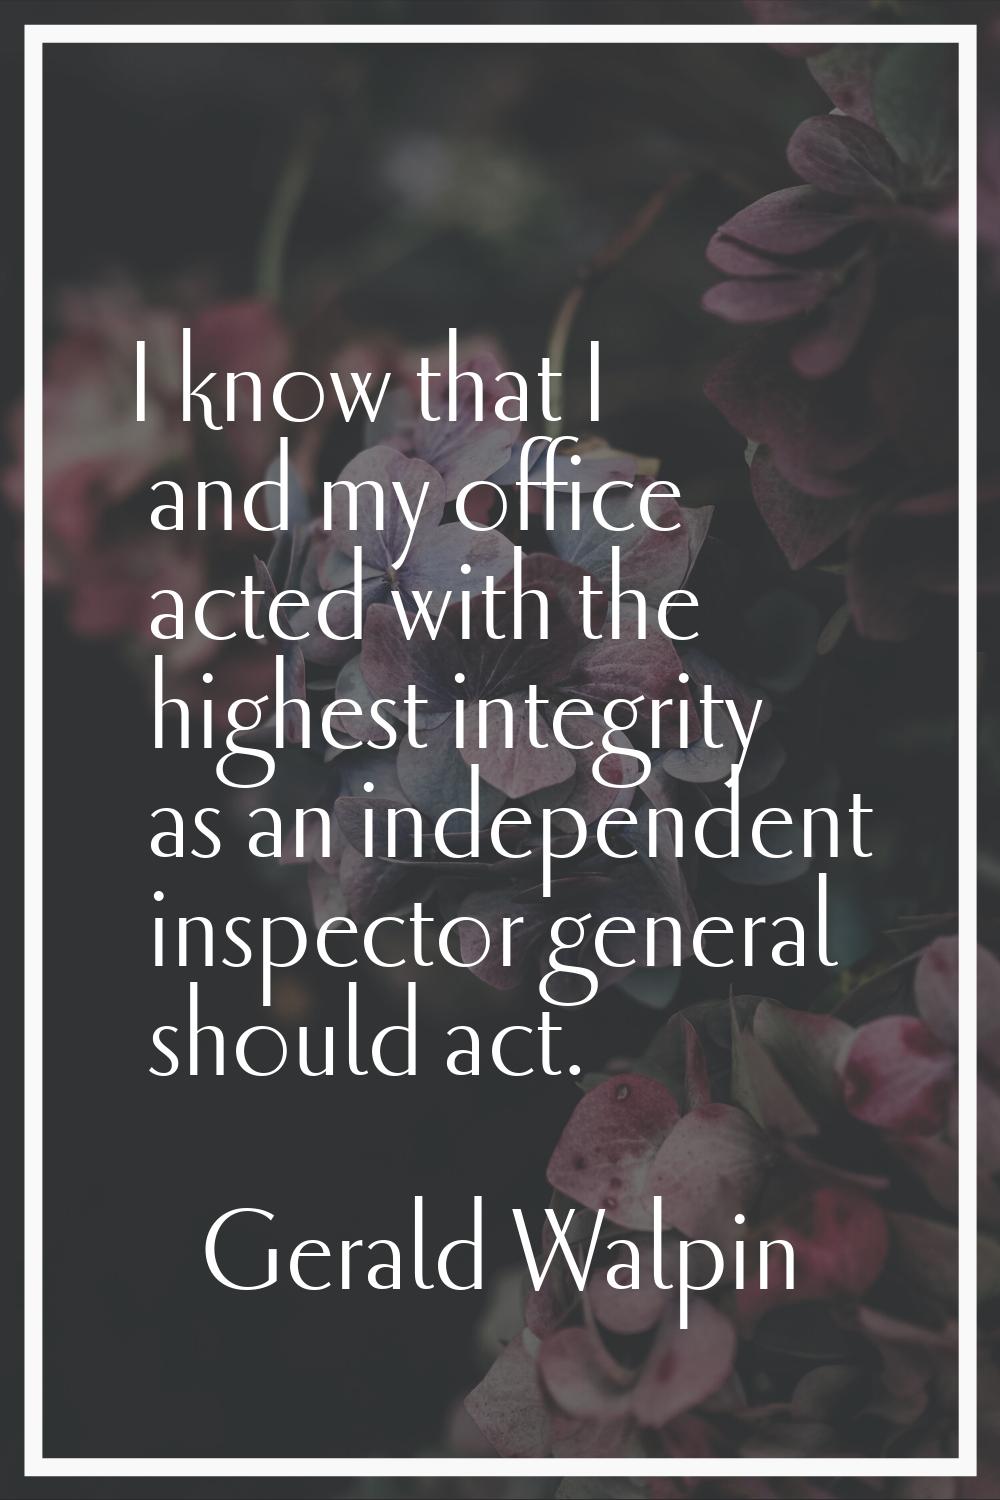 I know that I and my office acted with the highest integrity as an independent inspector general sh